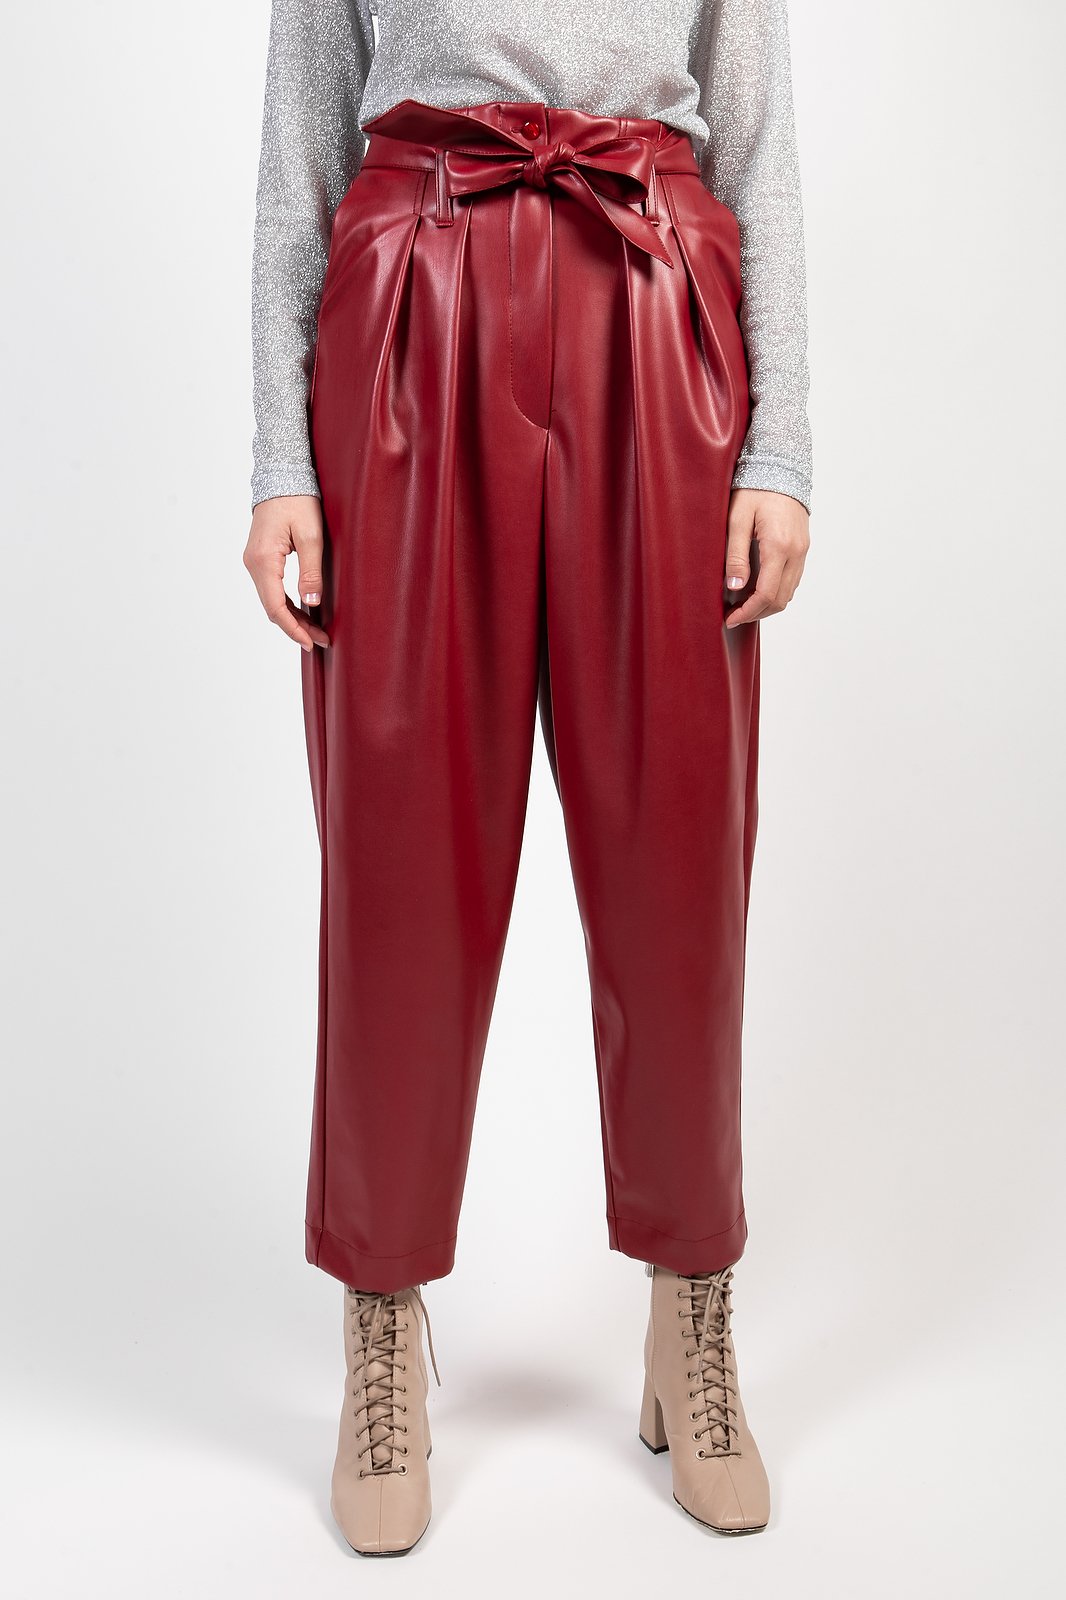 Image of PANTALONE PILLY ROSSO €170 - 70% 